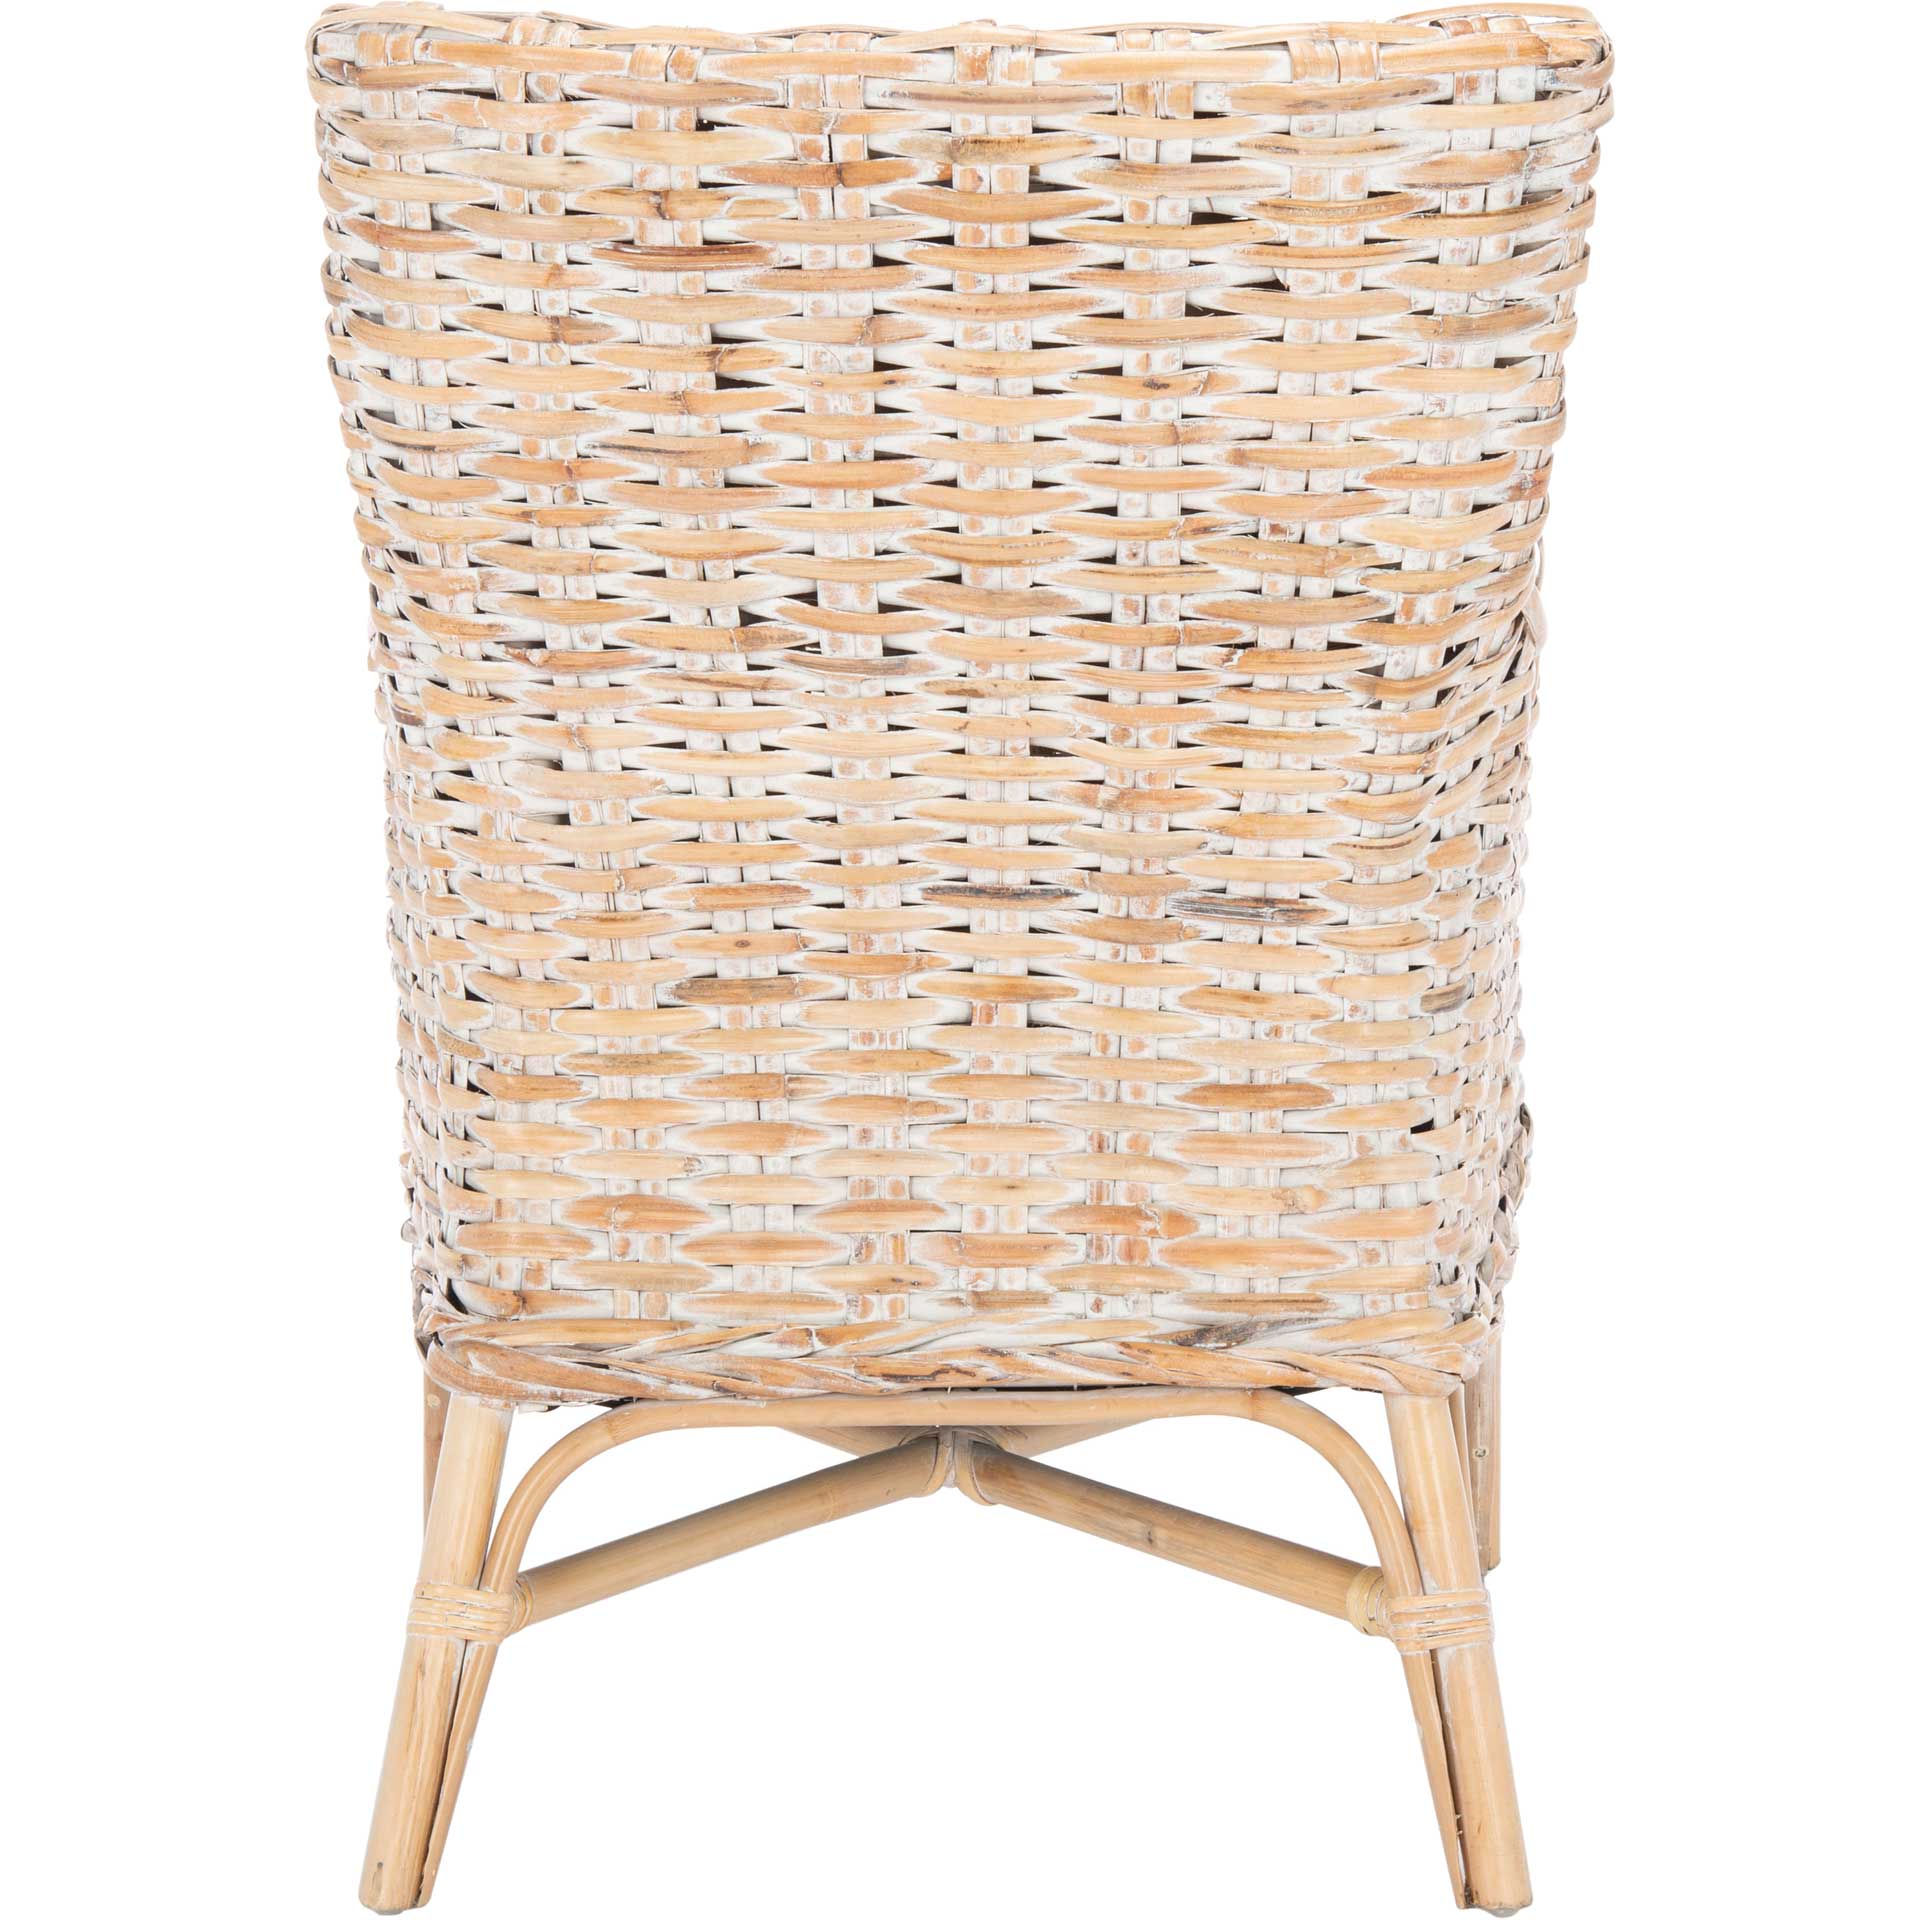 Crispin Rattan Accent Chair Natural White Wash